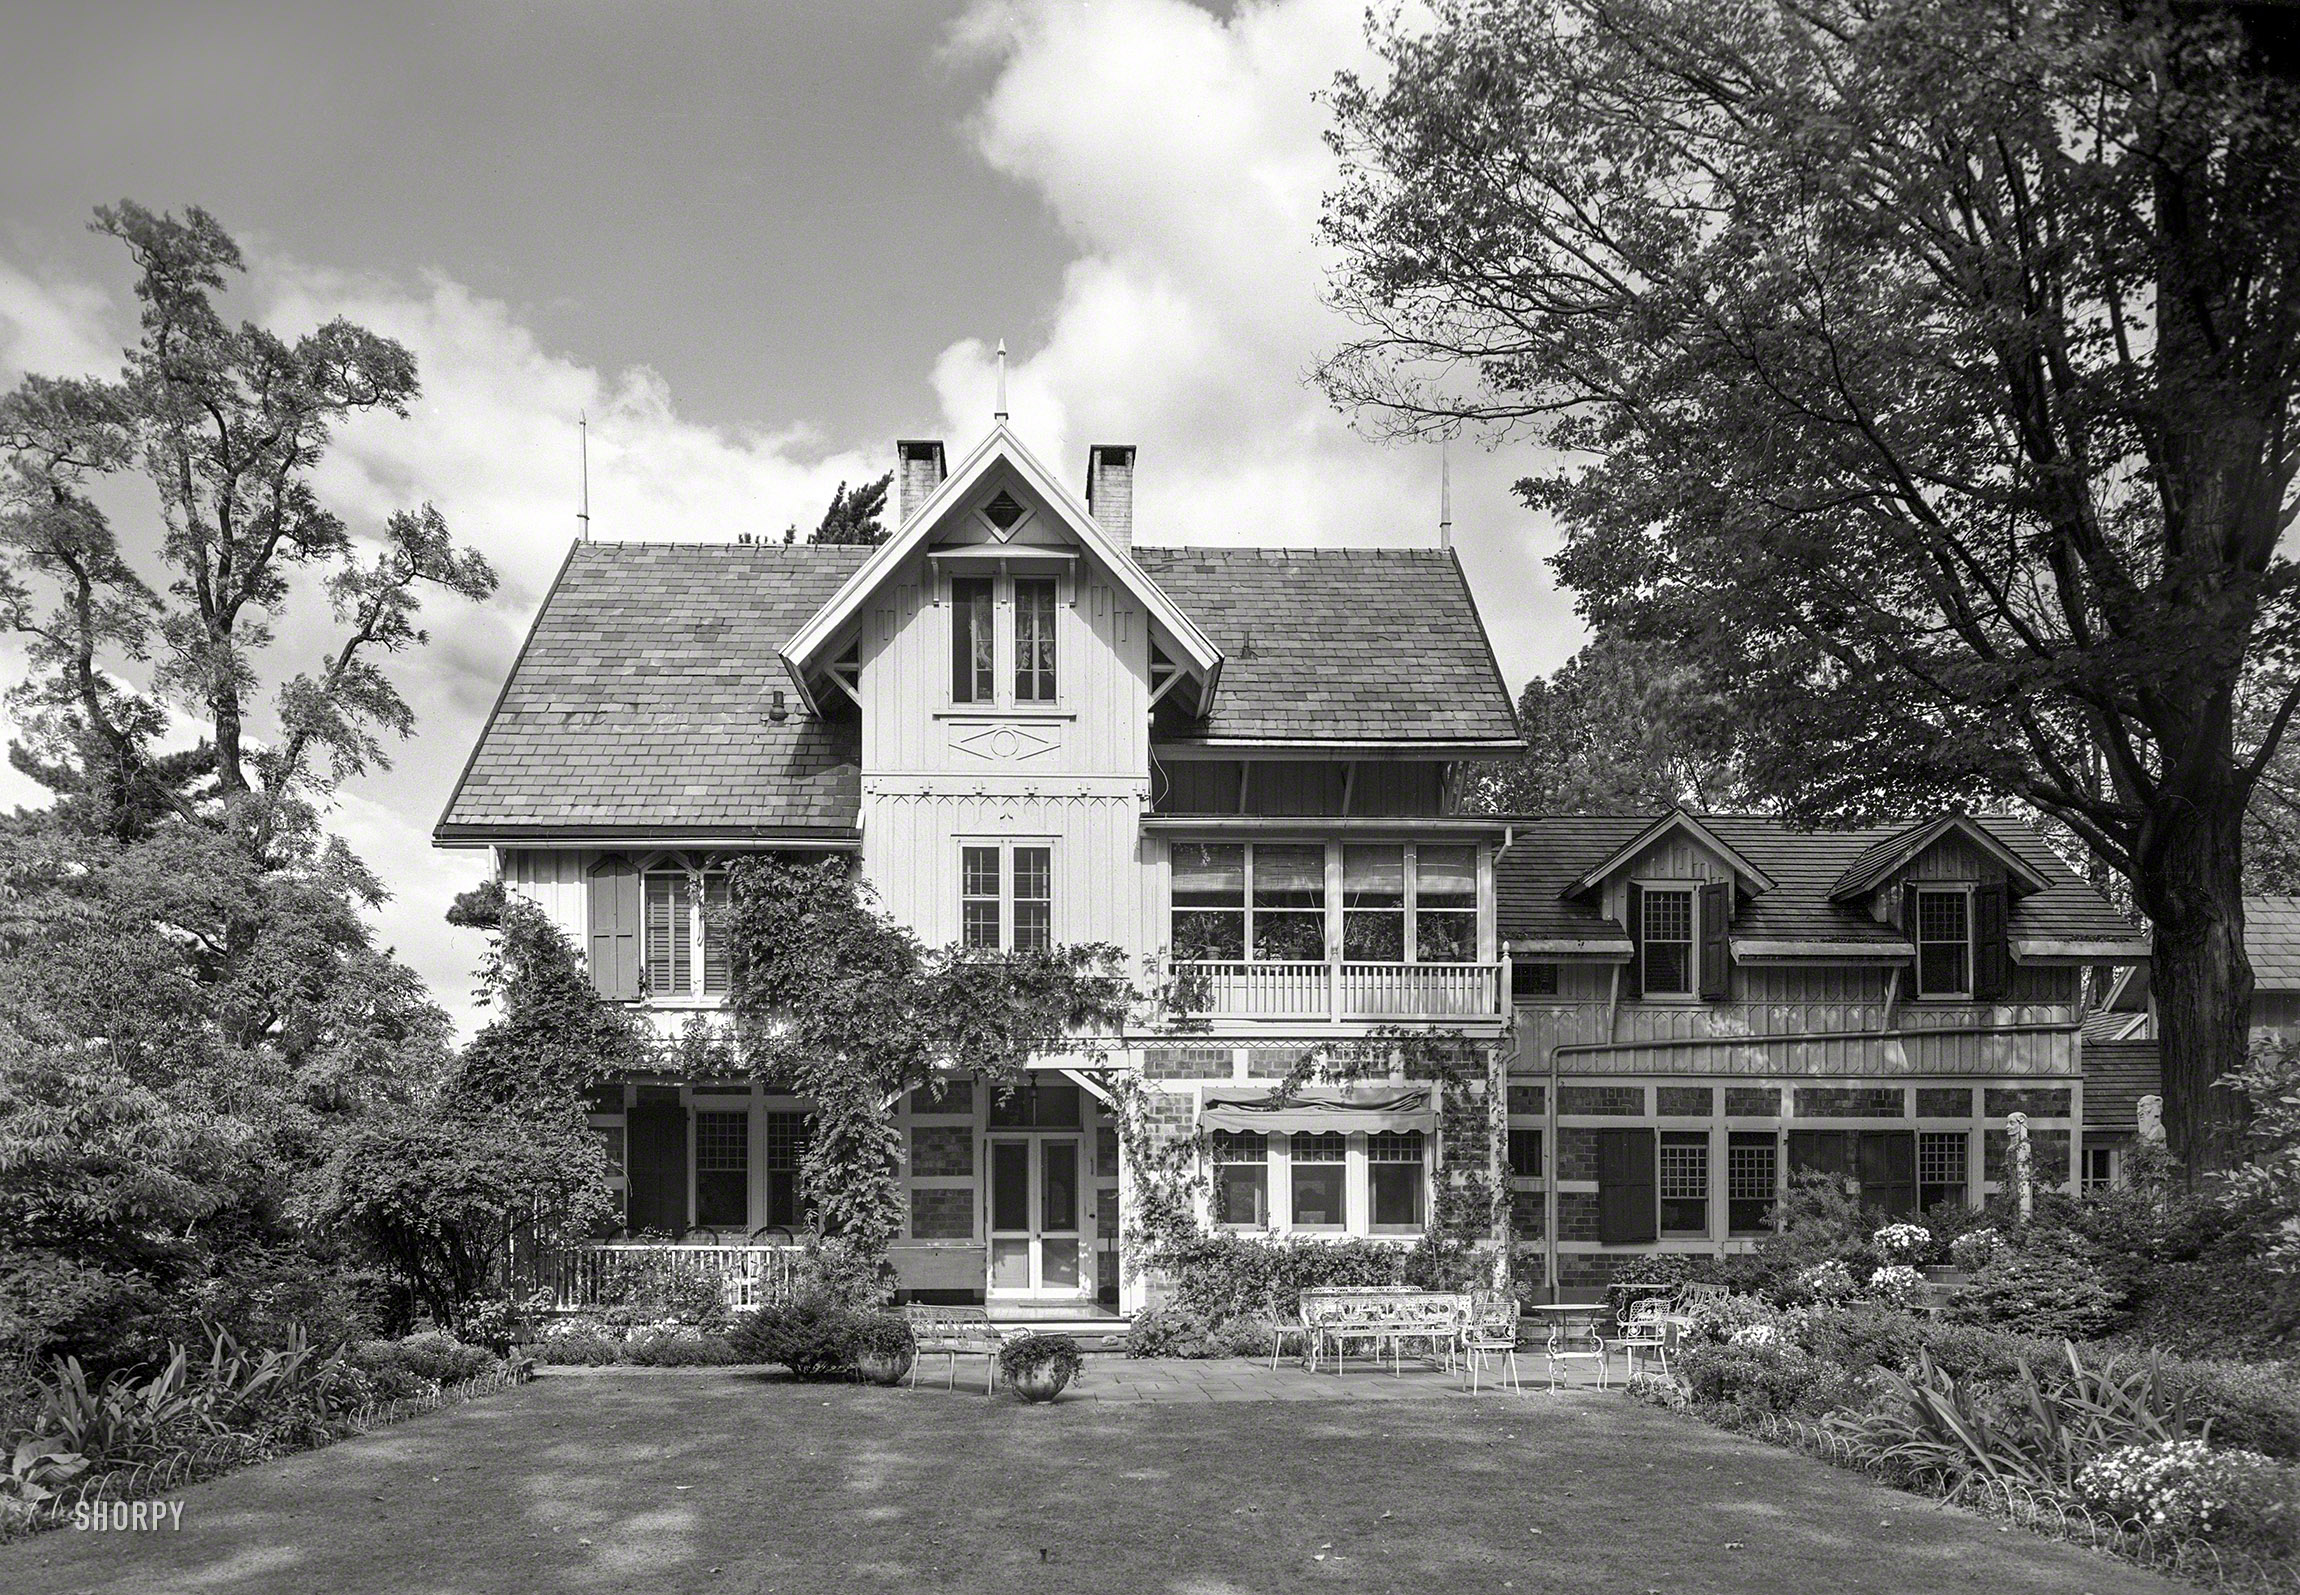 Oct. 13, 1945. "Childs Frick residence, 'Clayton,' Roslyn, Long Island. South facade." Large-format acetate negative by Gottscho-Schleisner. View full size.